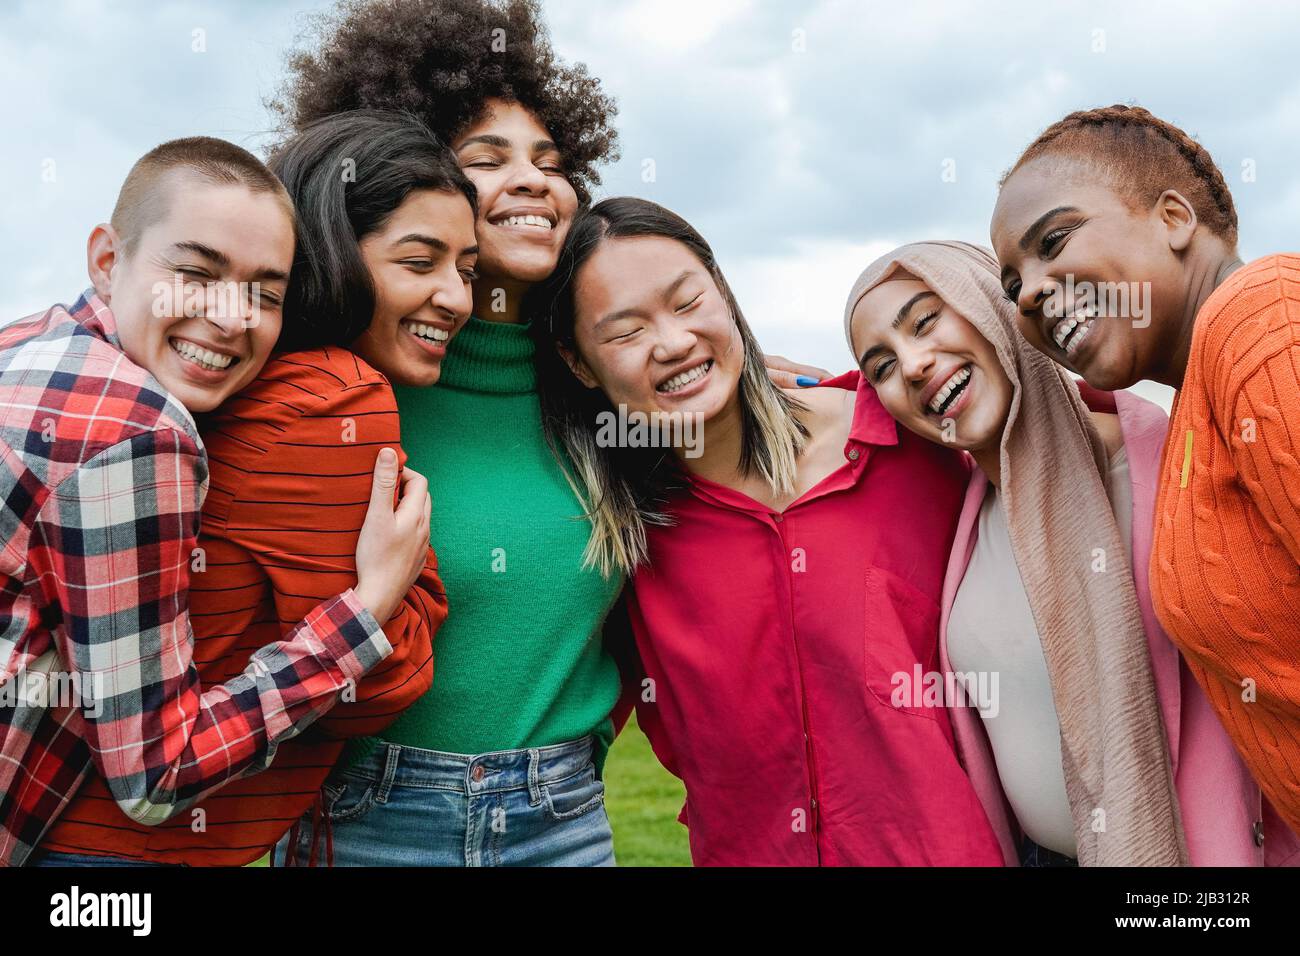 Multiethnic young women having fun together outdoor - Focus on muslim girl face Stock Photo